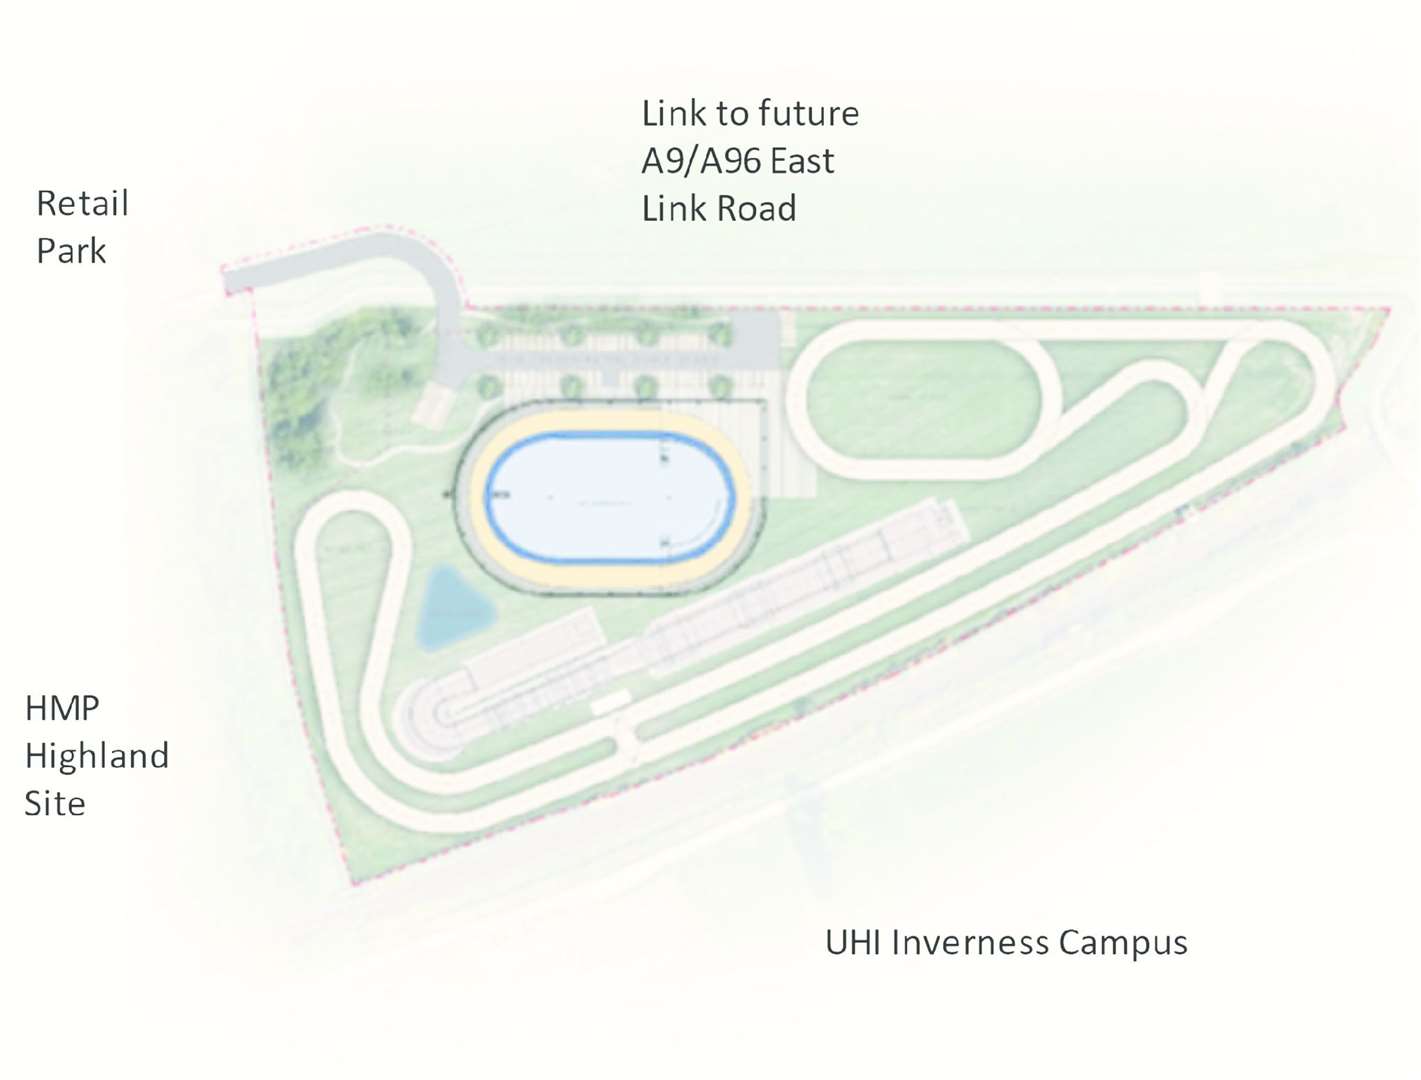 The velodrome was planned to be near Inverness Campus.